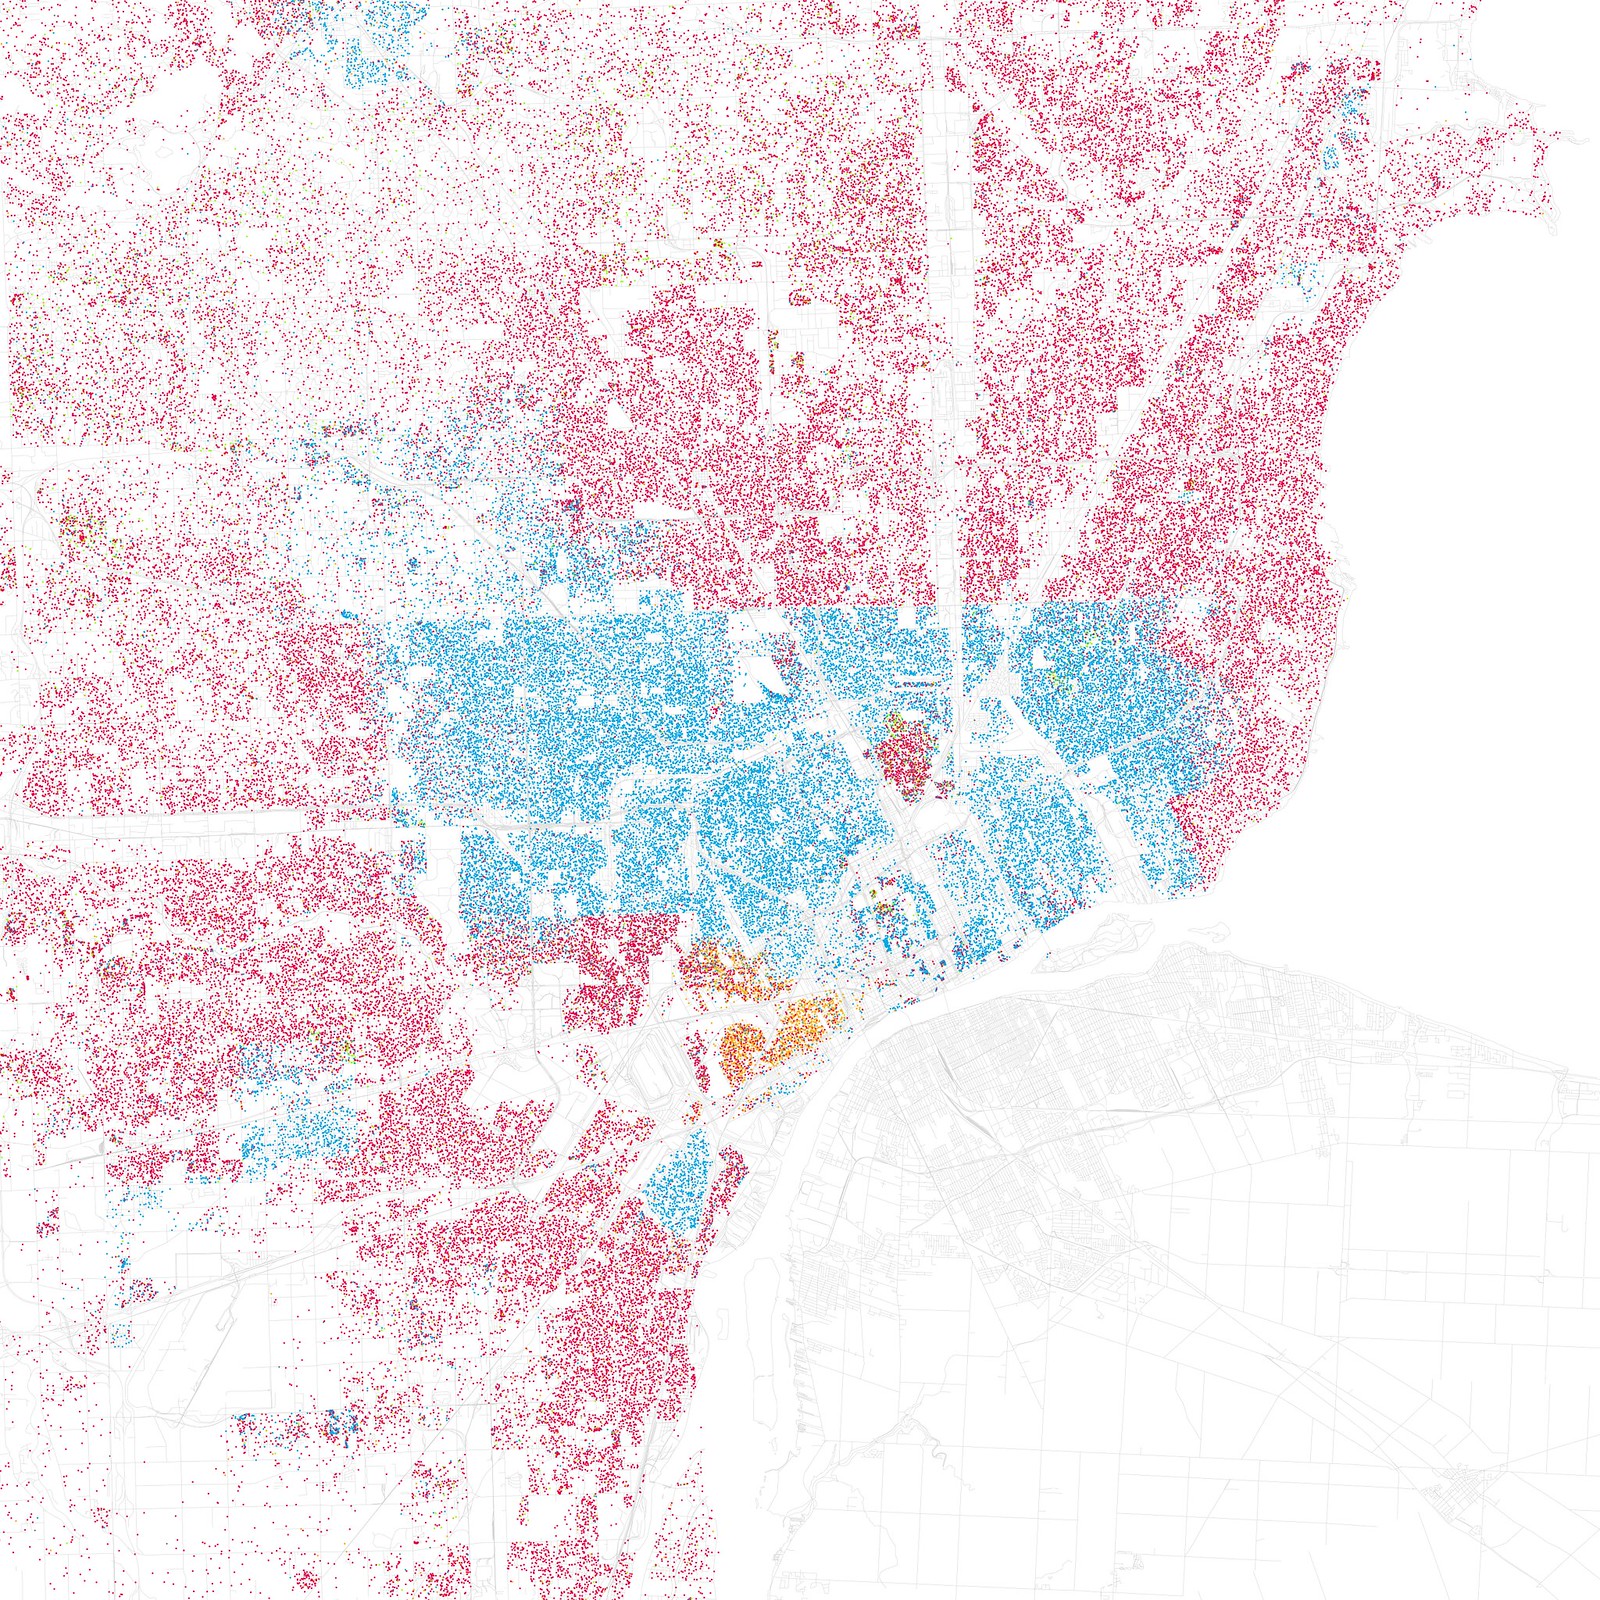 A map of Detroit, overlaid by dots that represent demographic groups.